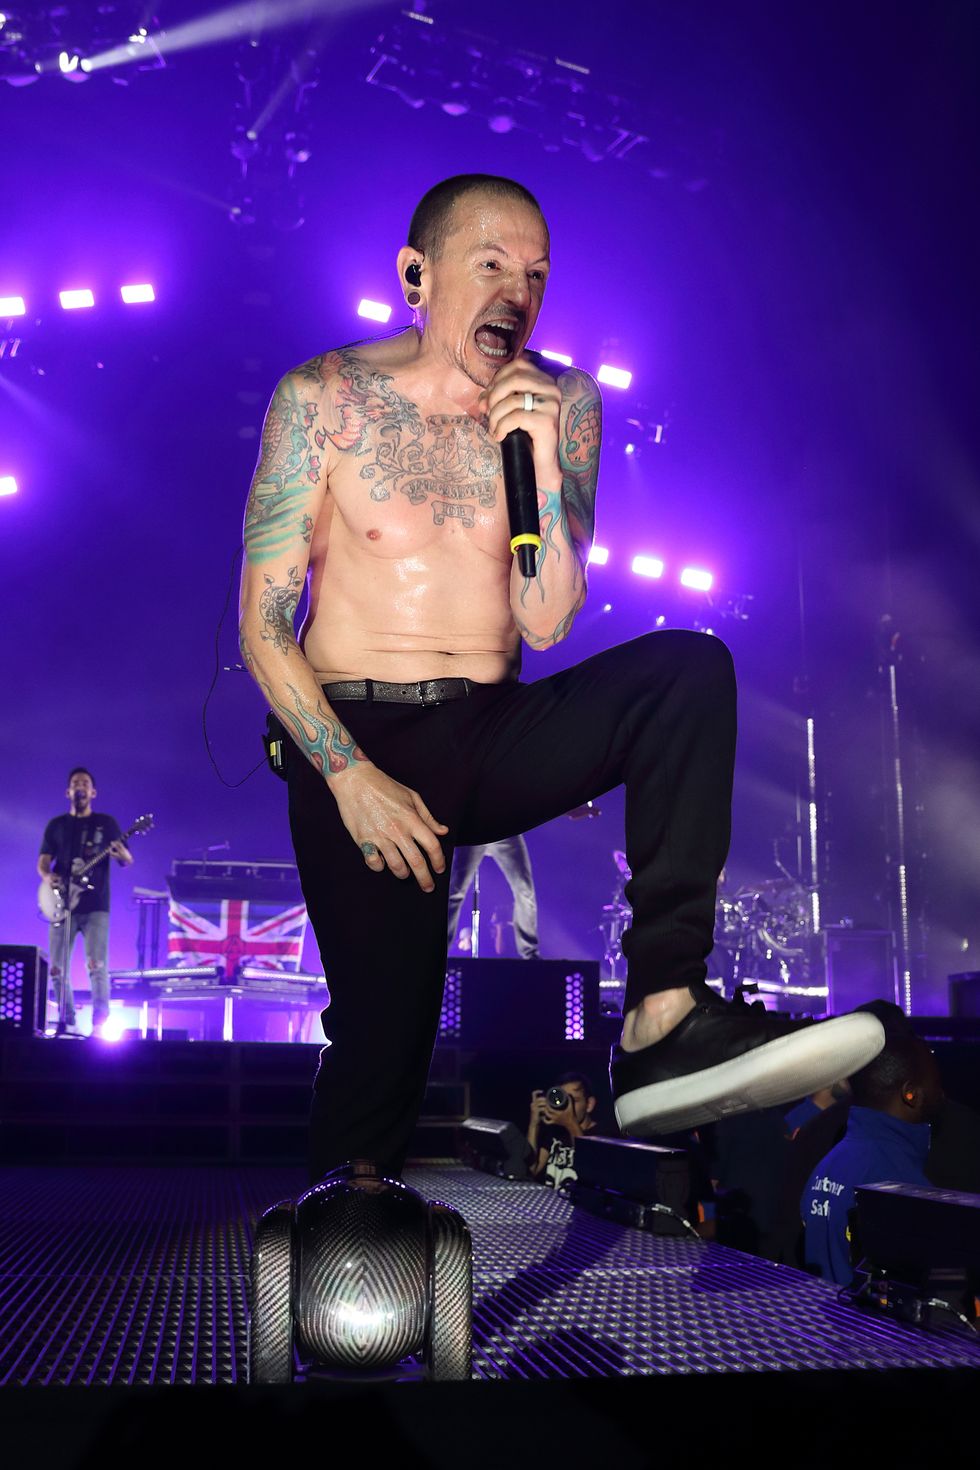 LONDON, ENGLAND - JULY 03:  Chester Bennington of Linkin Park performs at The O2 Arena on July 3, 2017 in London, England.  (Photo by Burak Cingi/Redferns)